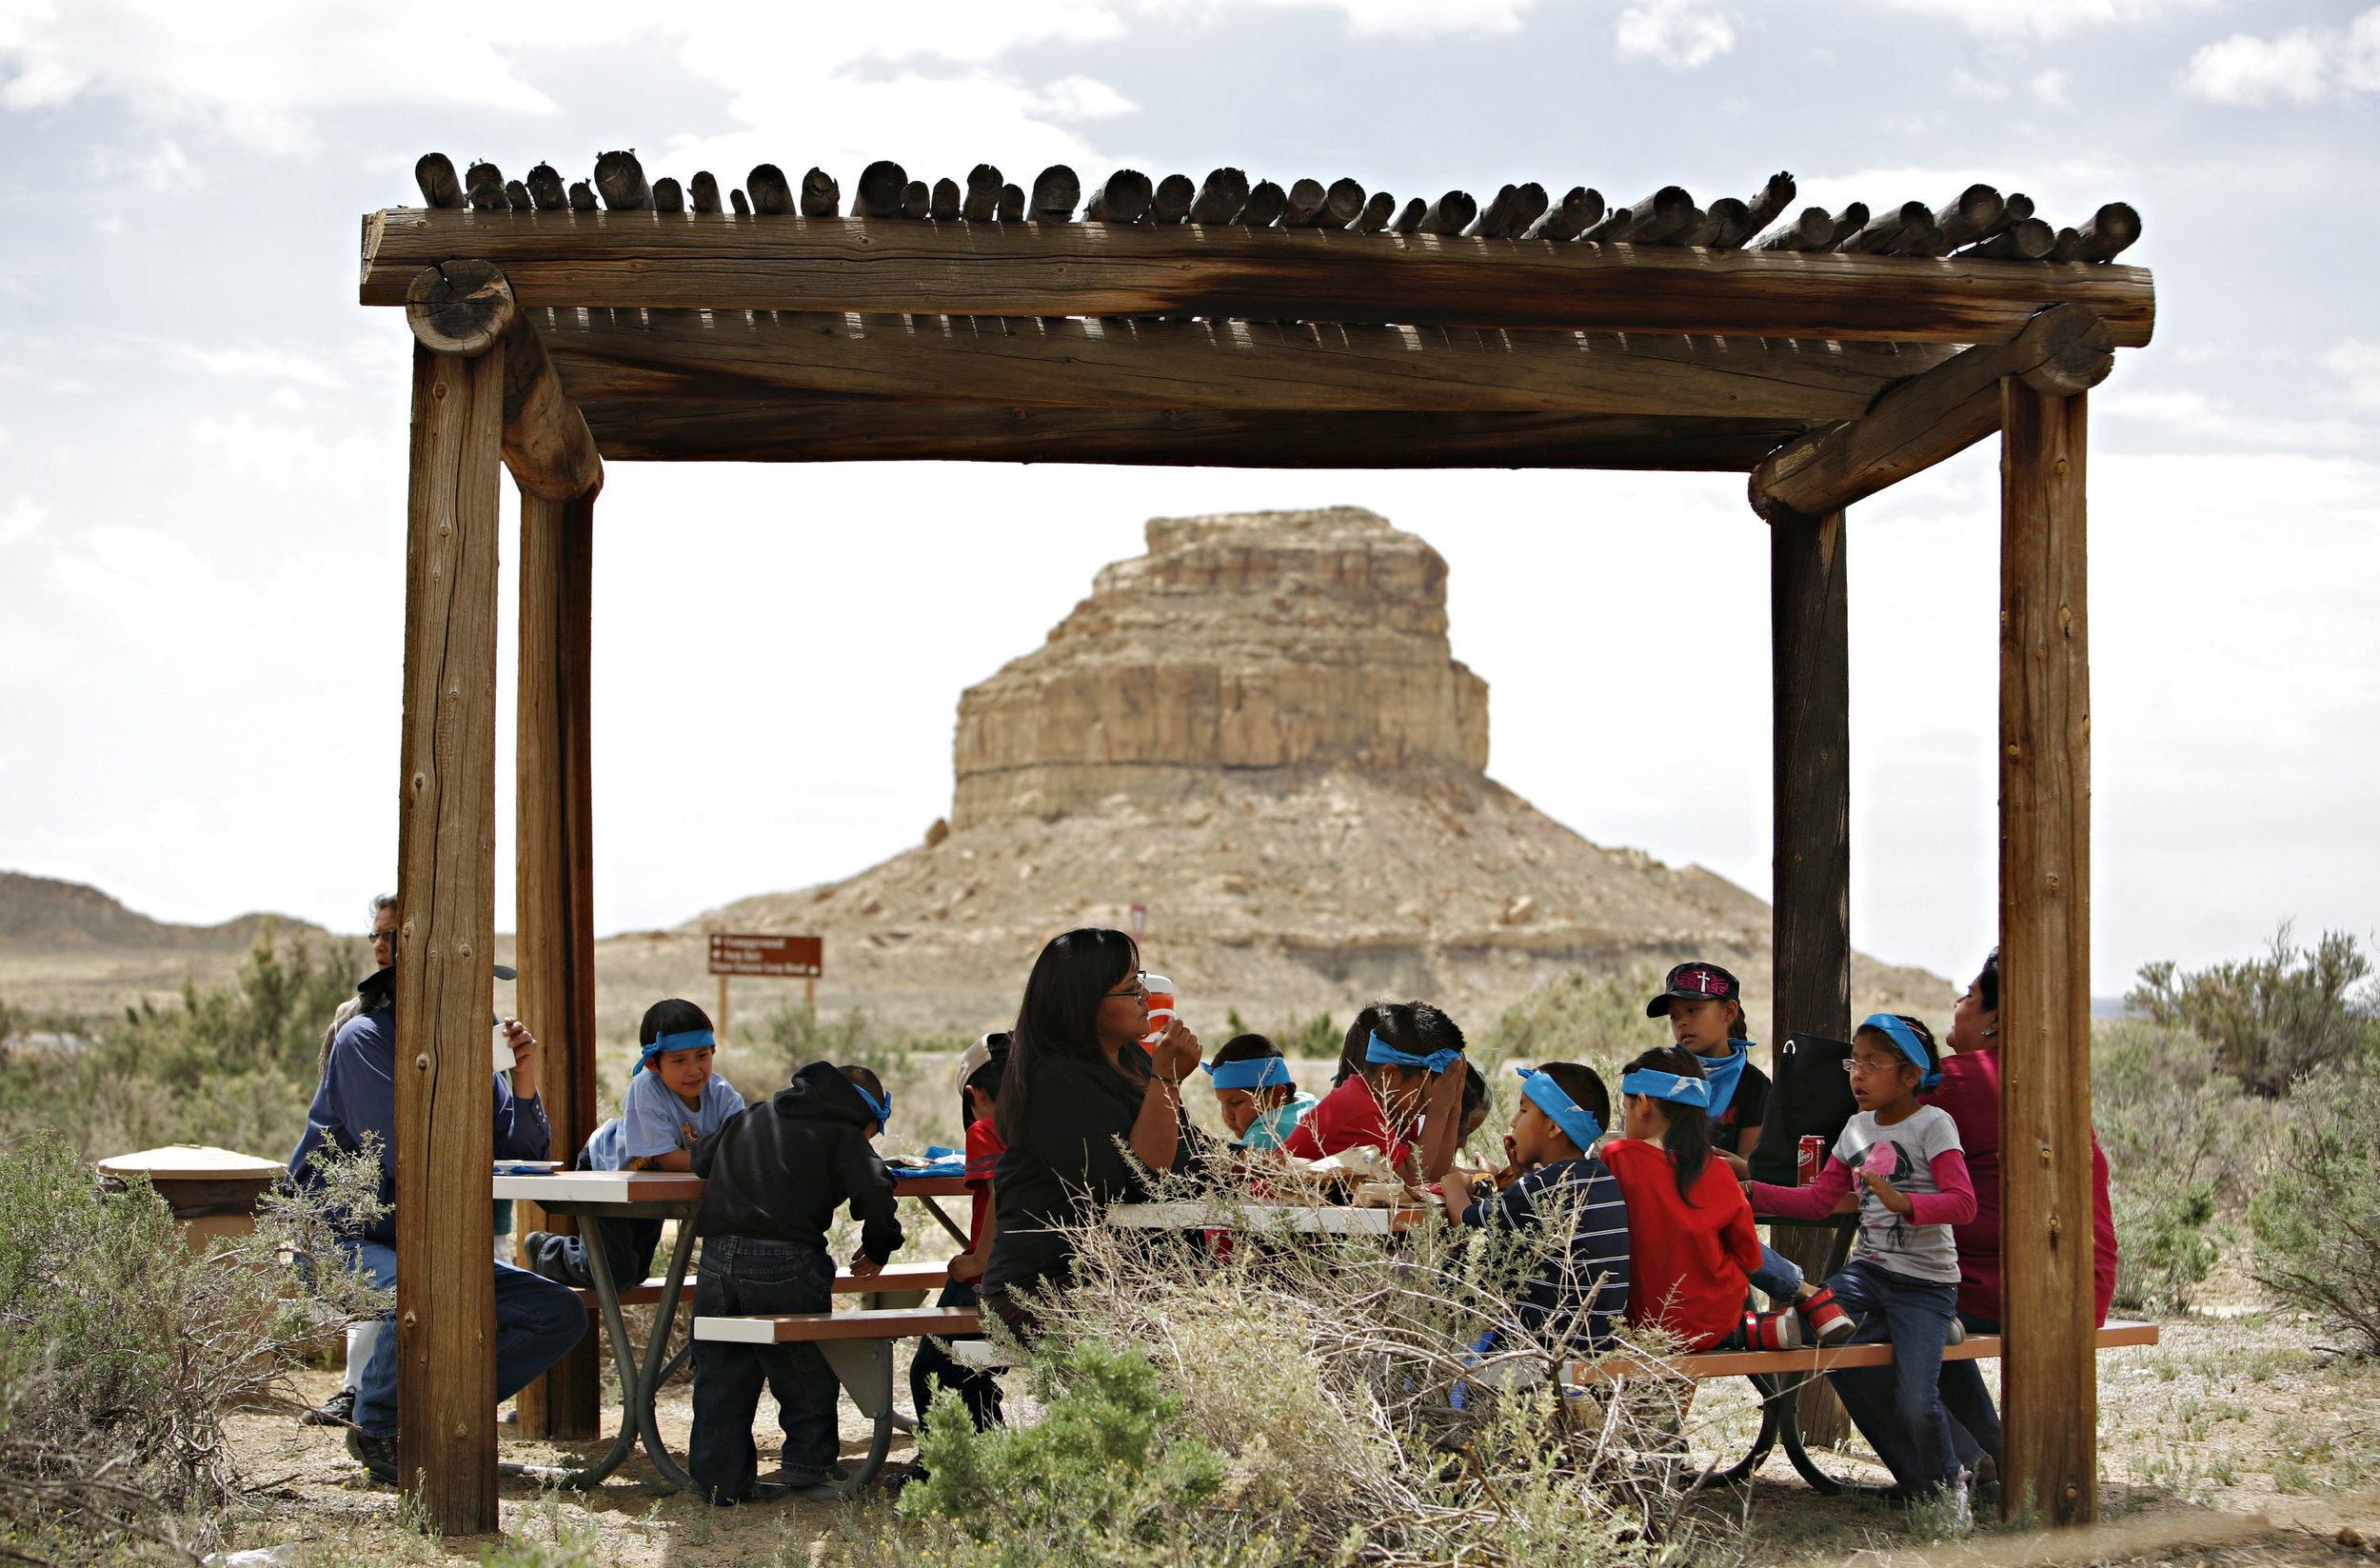  Children from Hanaa'dli Community School eat lunch outside the new visitor center at Chaco Canyon and in front of Fajada Butte, Thursday, April 26, 2012. (Morgan Petroski/Albuquerque Journal) 